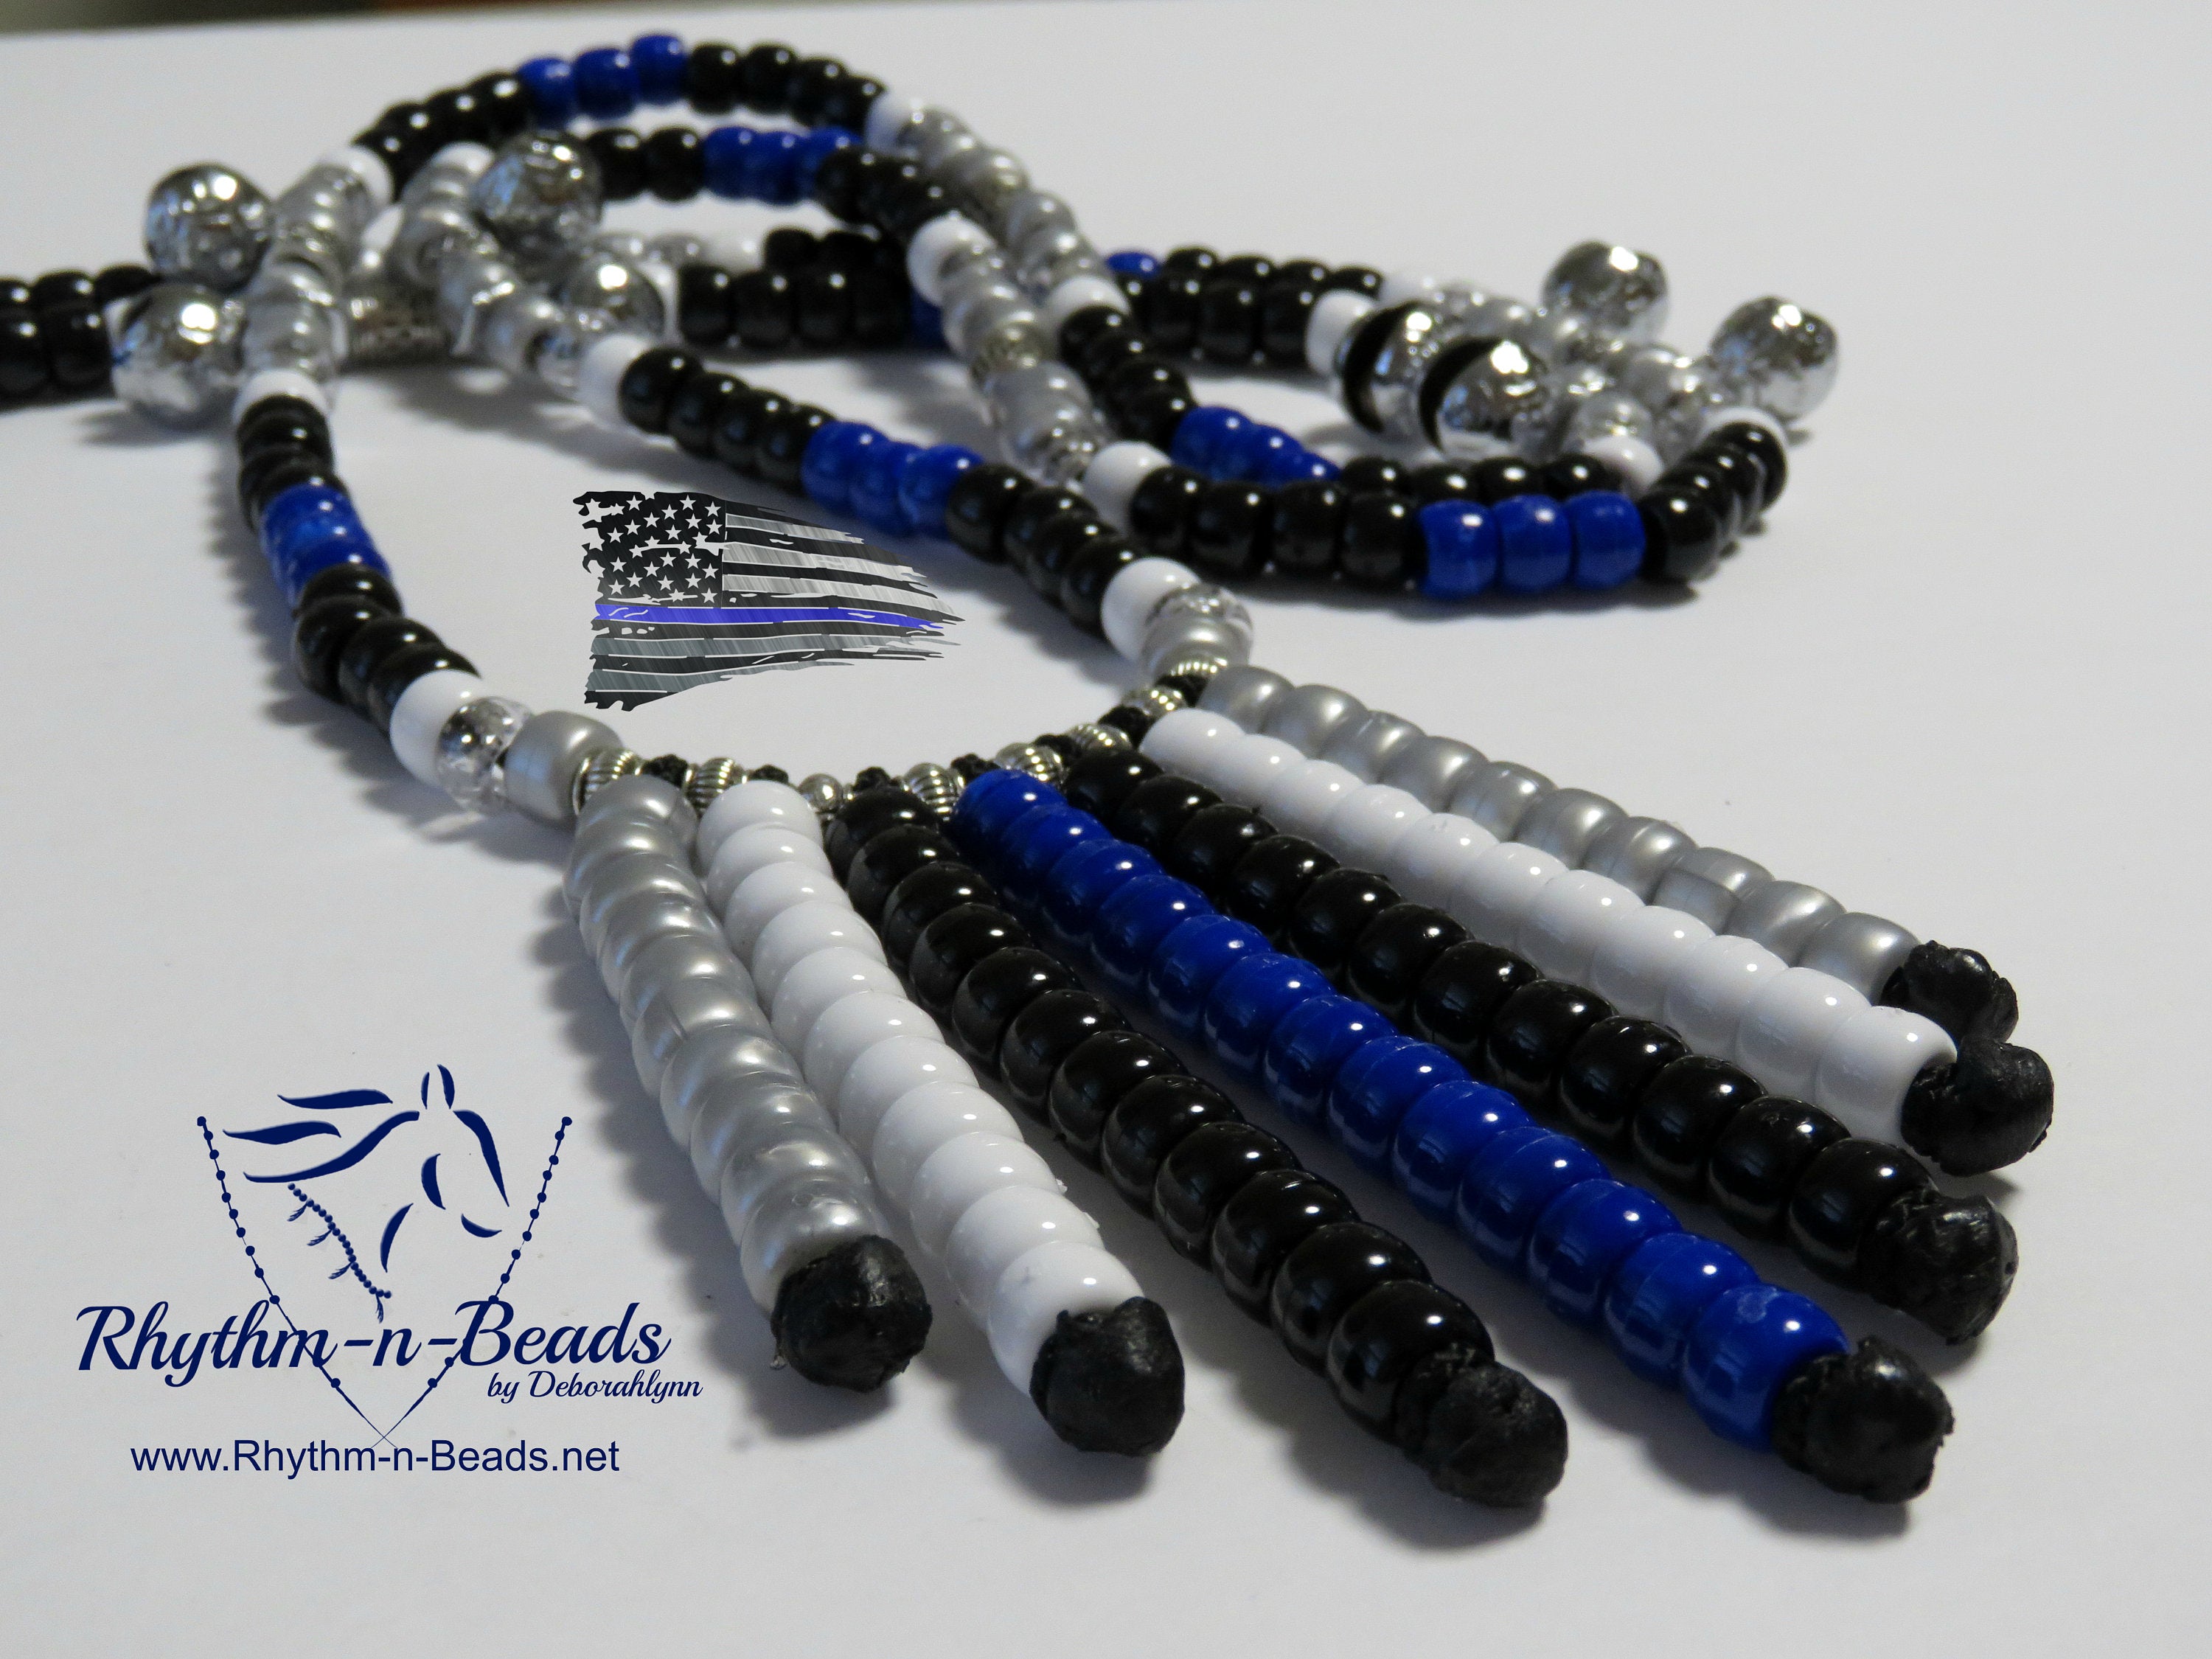 Rhythm Beads, The THIN BLUE LINE, Trail Riding Beads,Horse Necklace, Horse Tack, Trail Bells, Bear Bells,Rhythm Beads for Horses